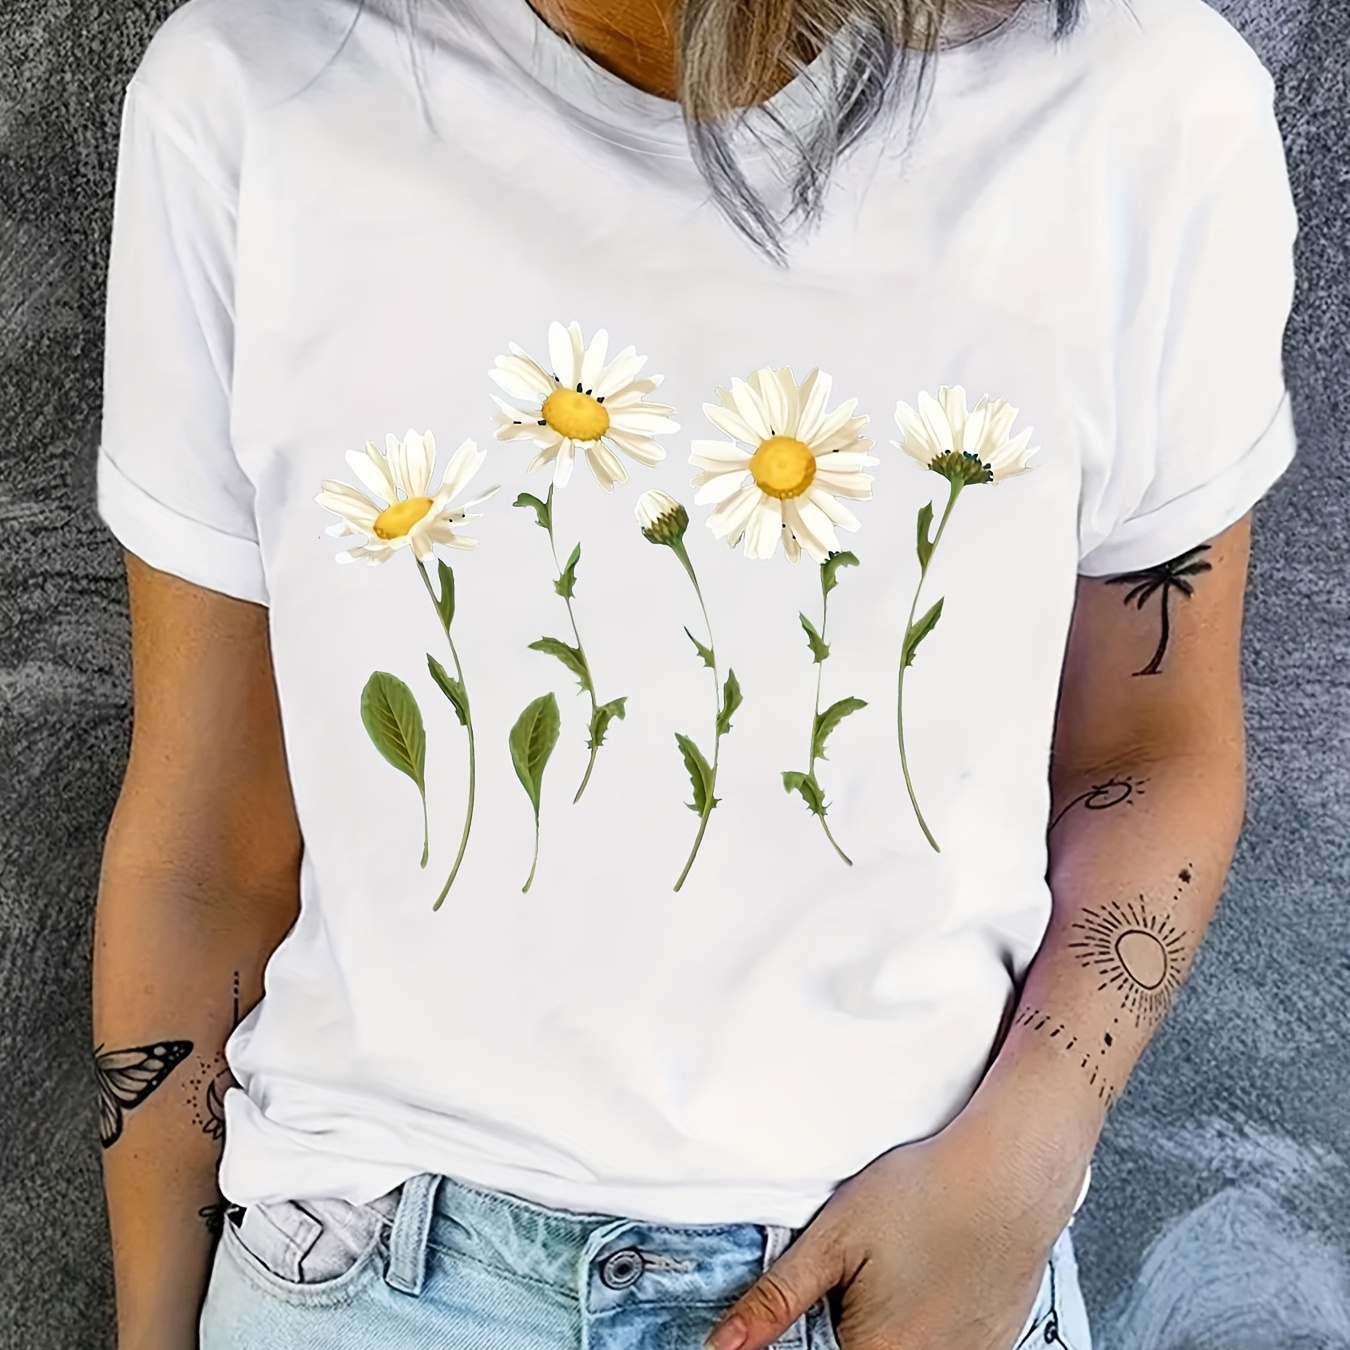 

Daisy Print Crew Neck T-shirt, Short Sleeve Casual Top For Summer & Spring, Women's Clothing